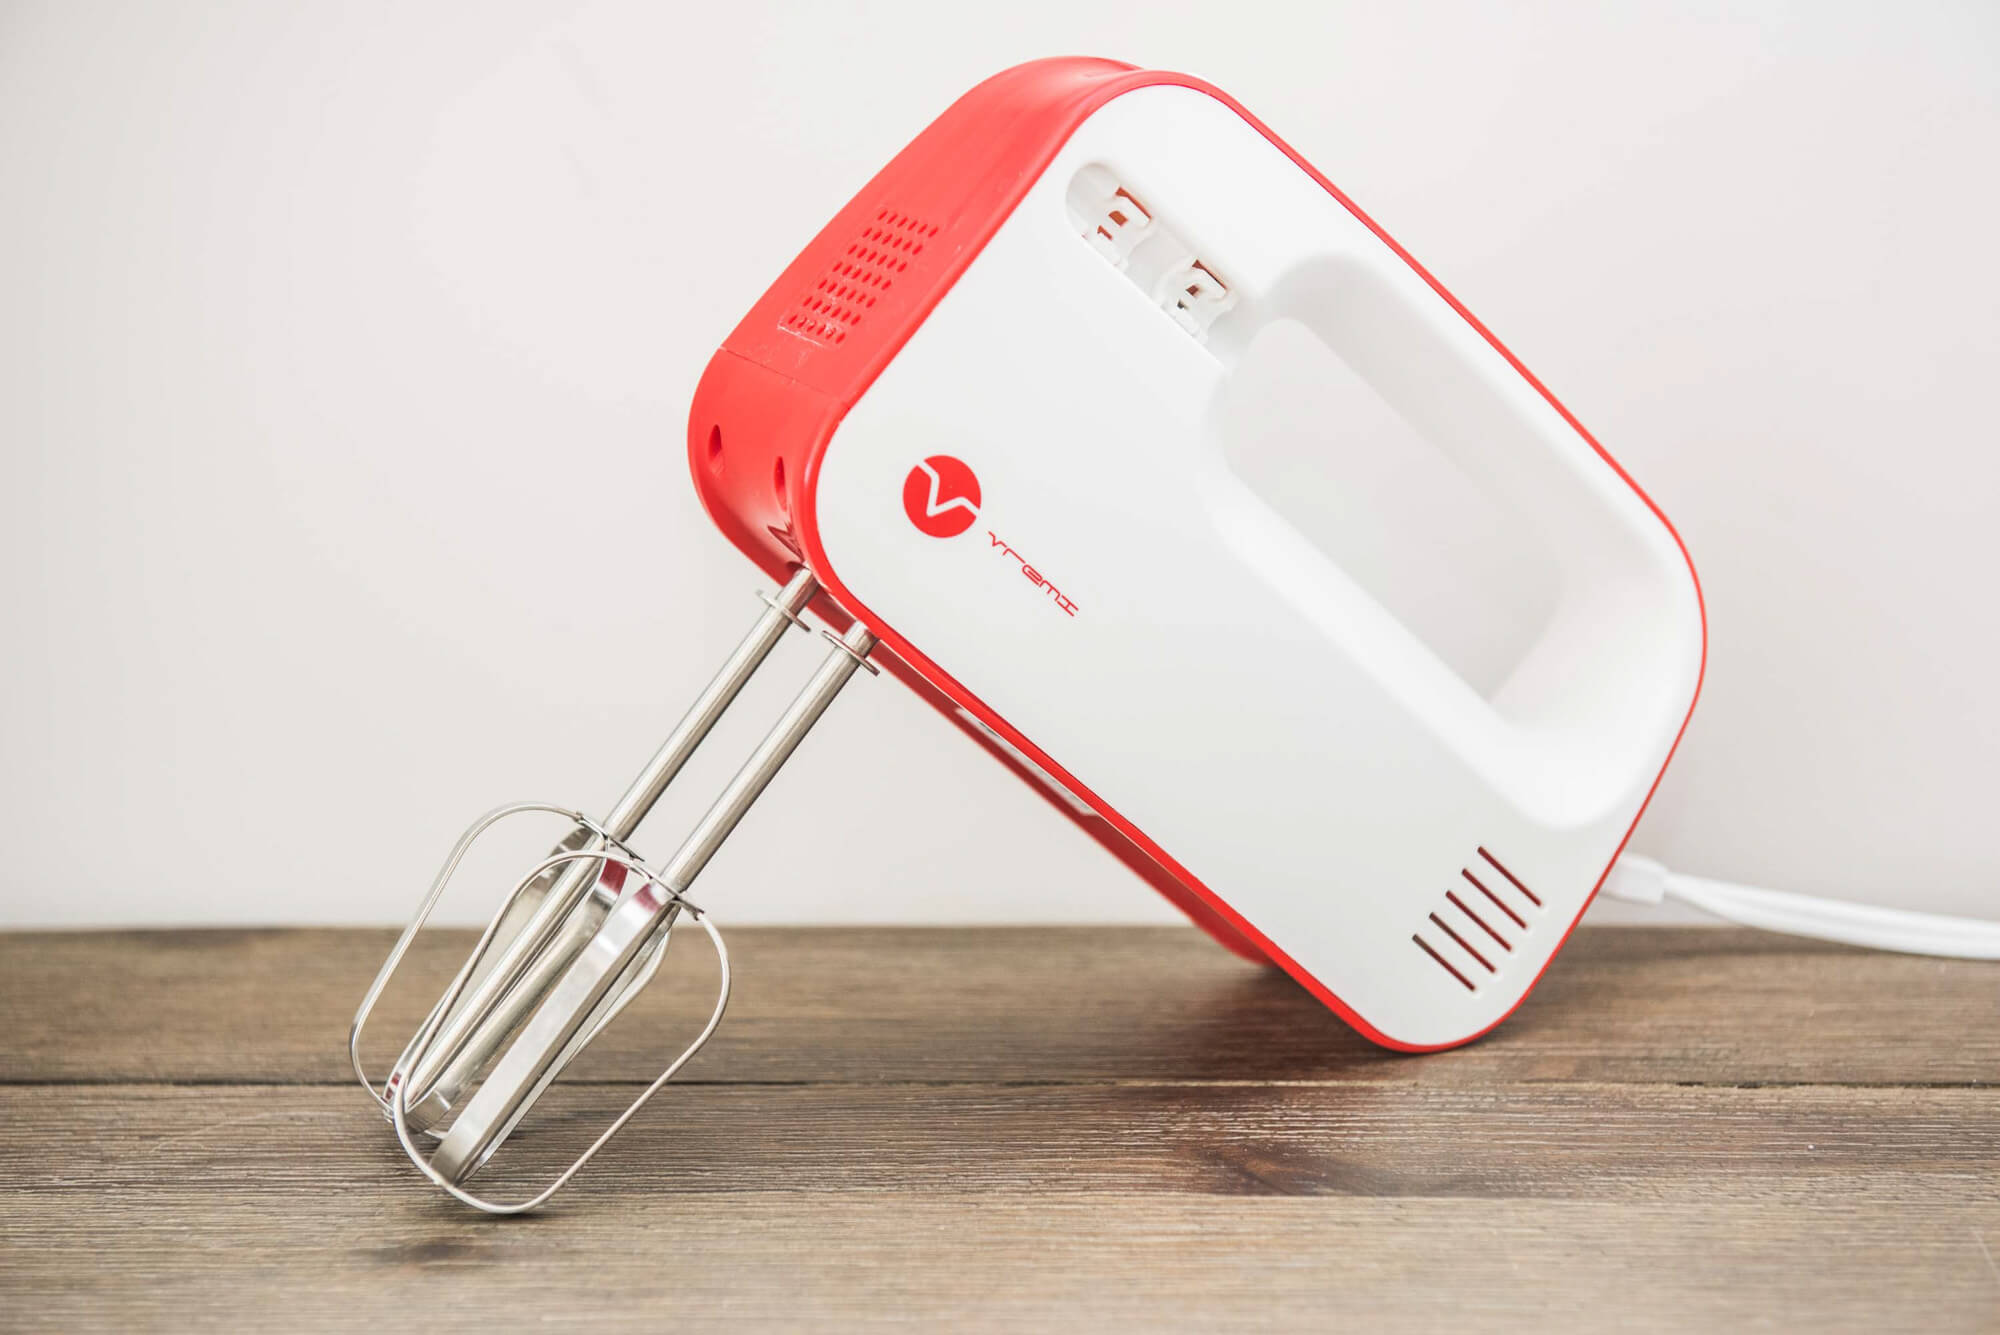 Breville Hand Mixer BHM800SIL Review